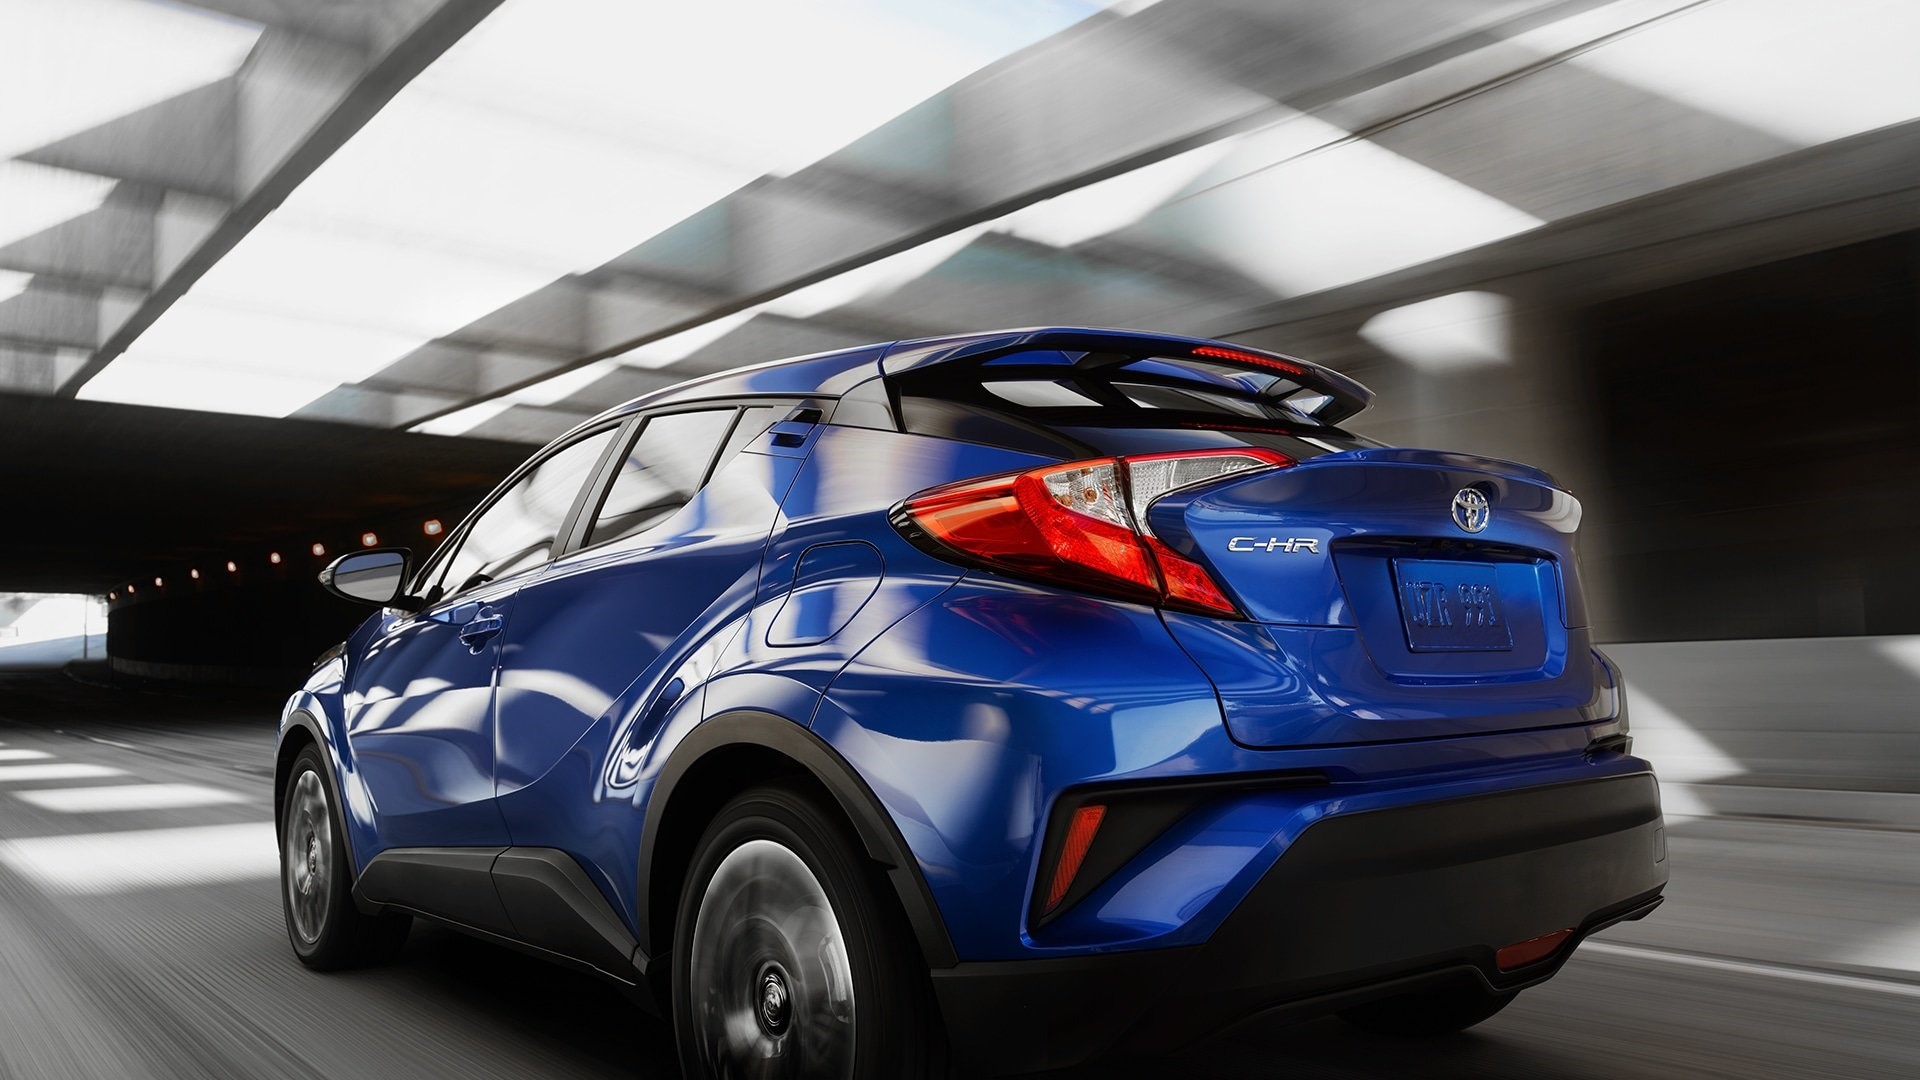 What Should I Know About the 2019 Toyota C-HR? | Toyota of Seattle Blog